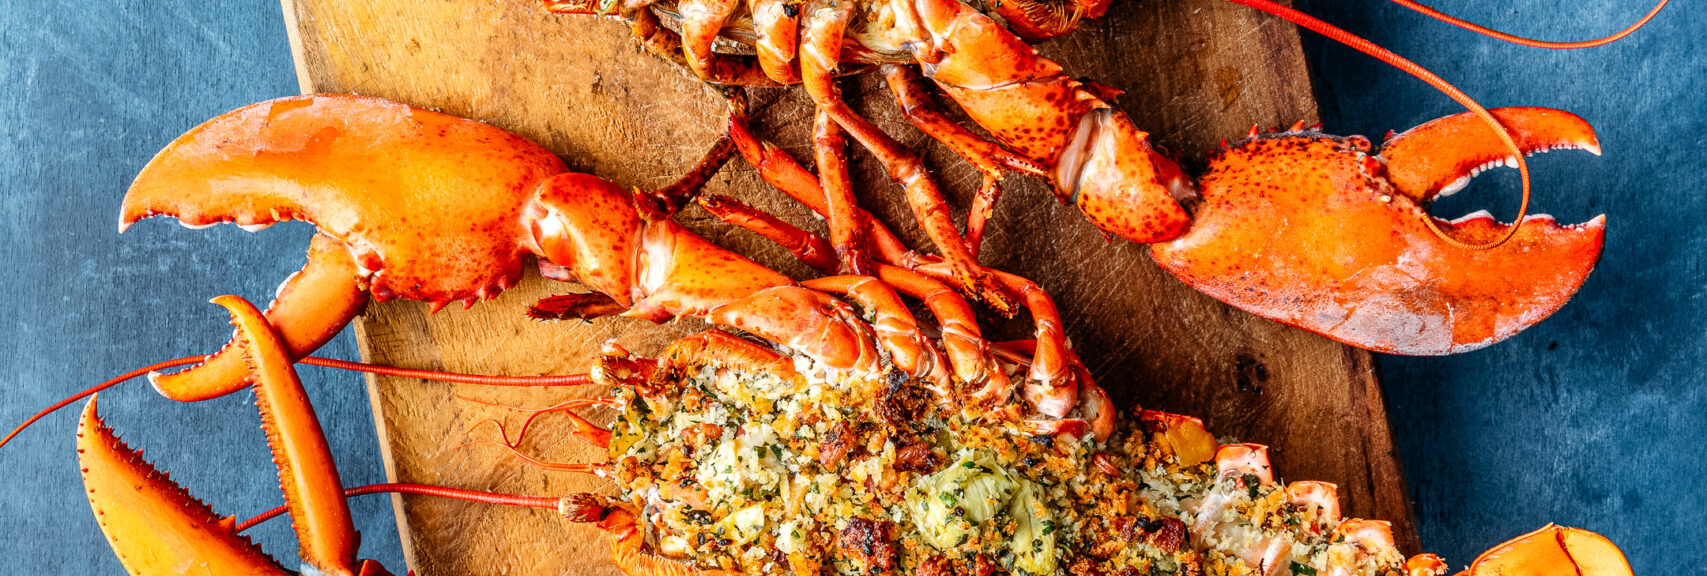 Whole Stuffed Maine Lobster with Herby Artichoke, Pancetta Bread Crumbs recipe image